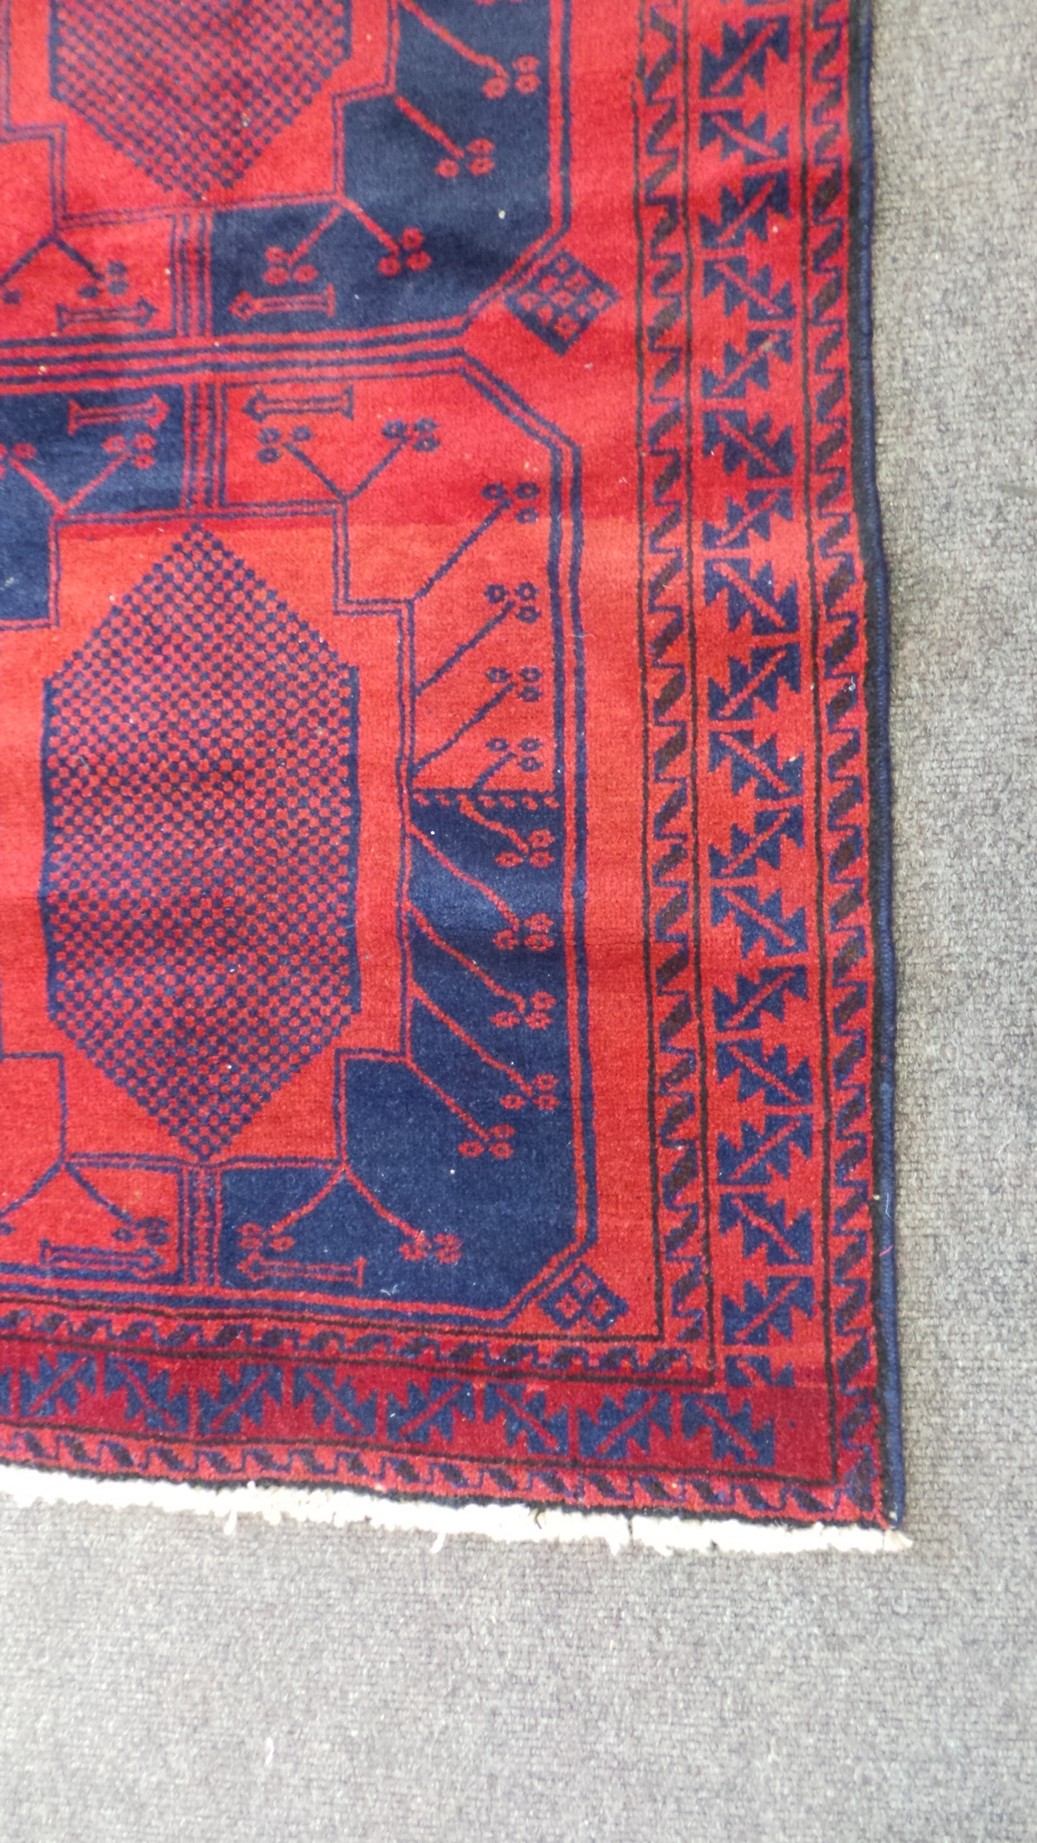 Afghan Beluchi Tribal Rug prominently Red & Blue colours with a large Bacara Design - Image 2 of 3